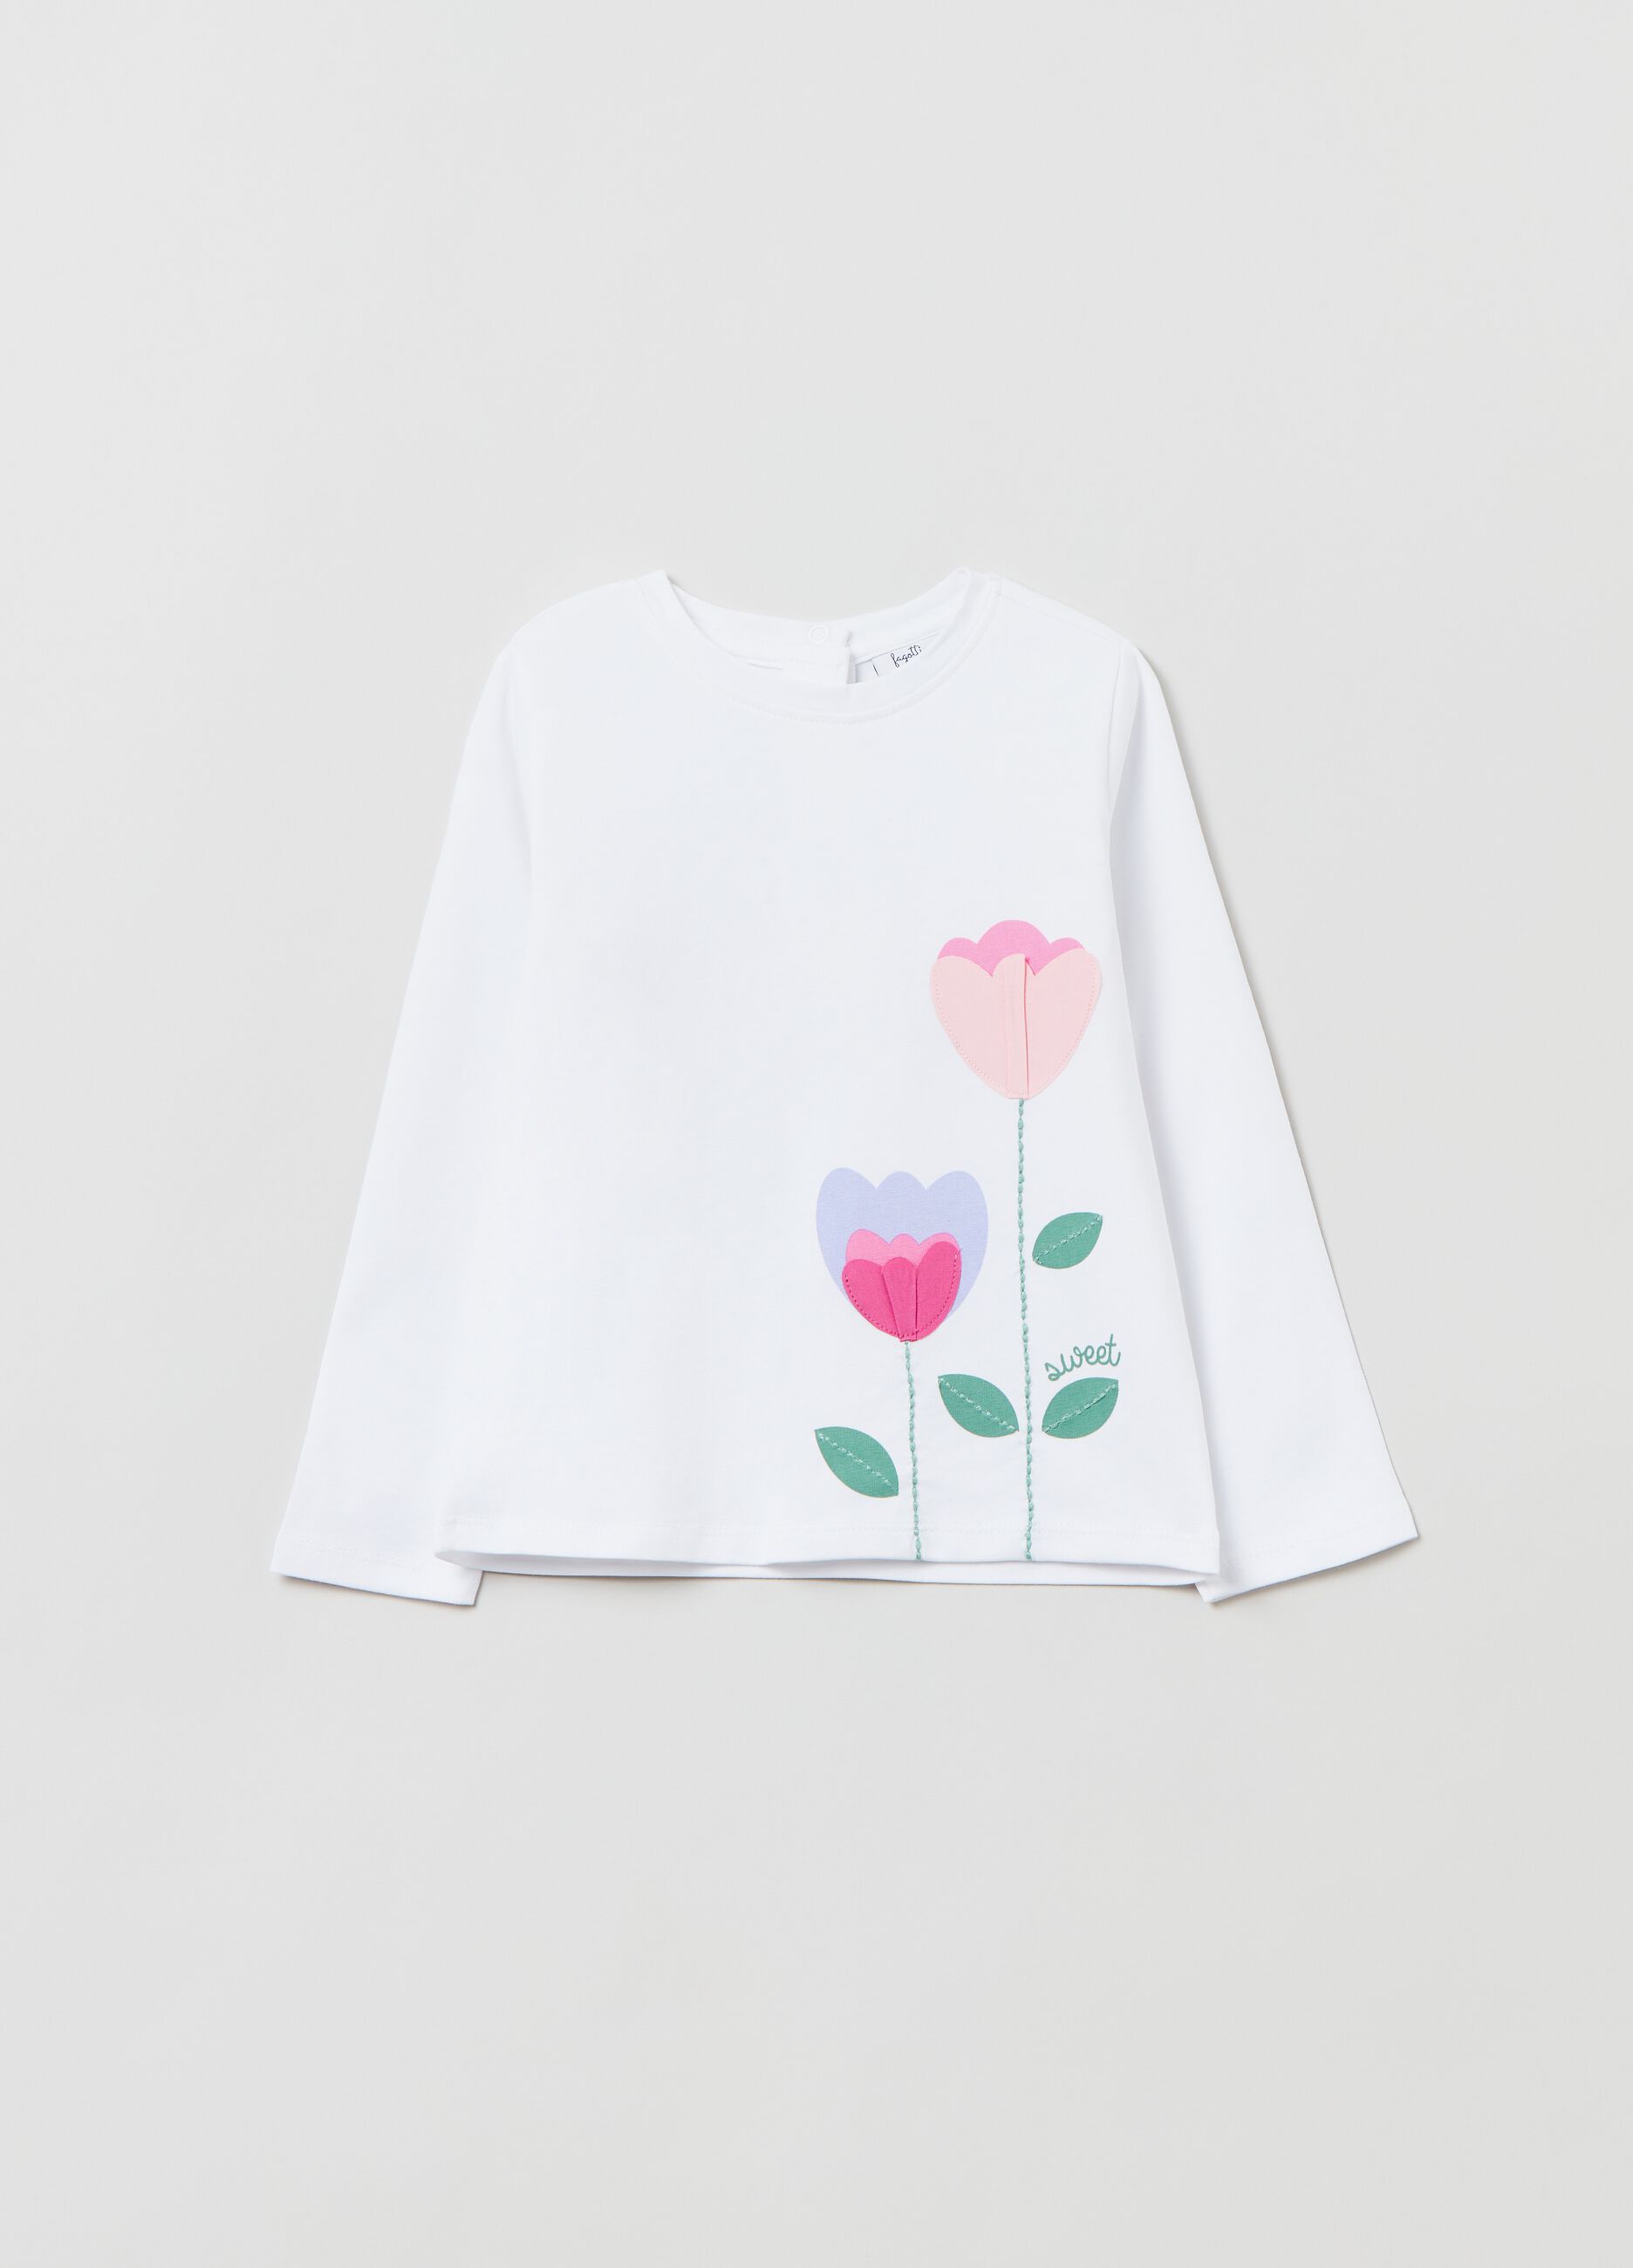 Long-sleeved, floral printed T-shirt